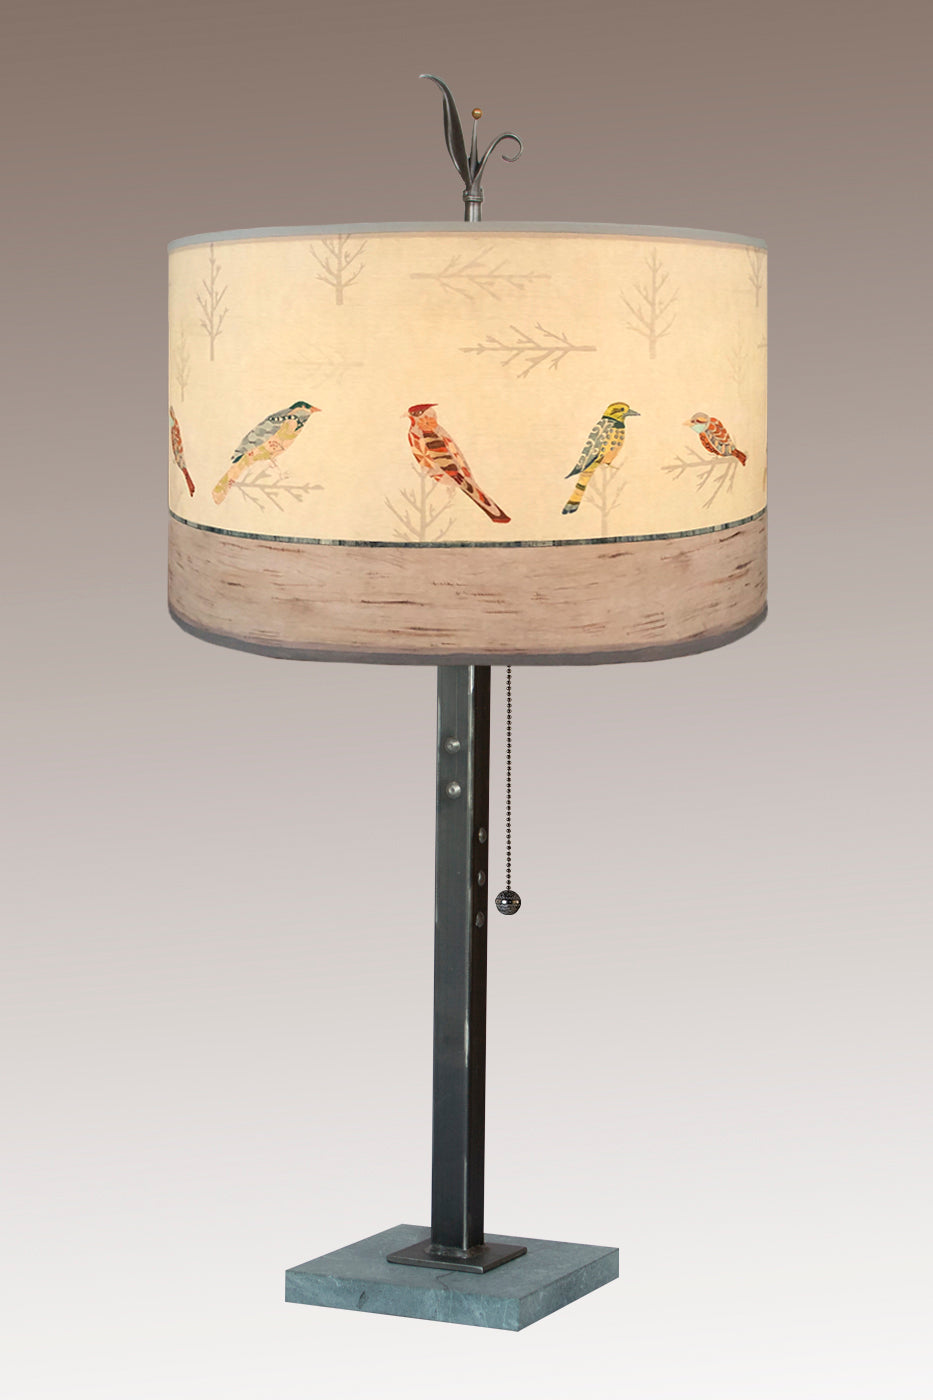 Janna Ugone & Co Table Lamps Steel Table Lamp with Large Drum Shade in Bird Friends